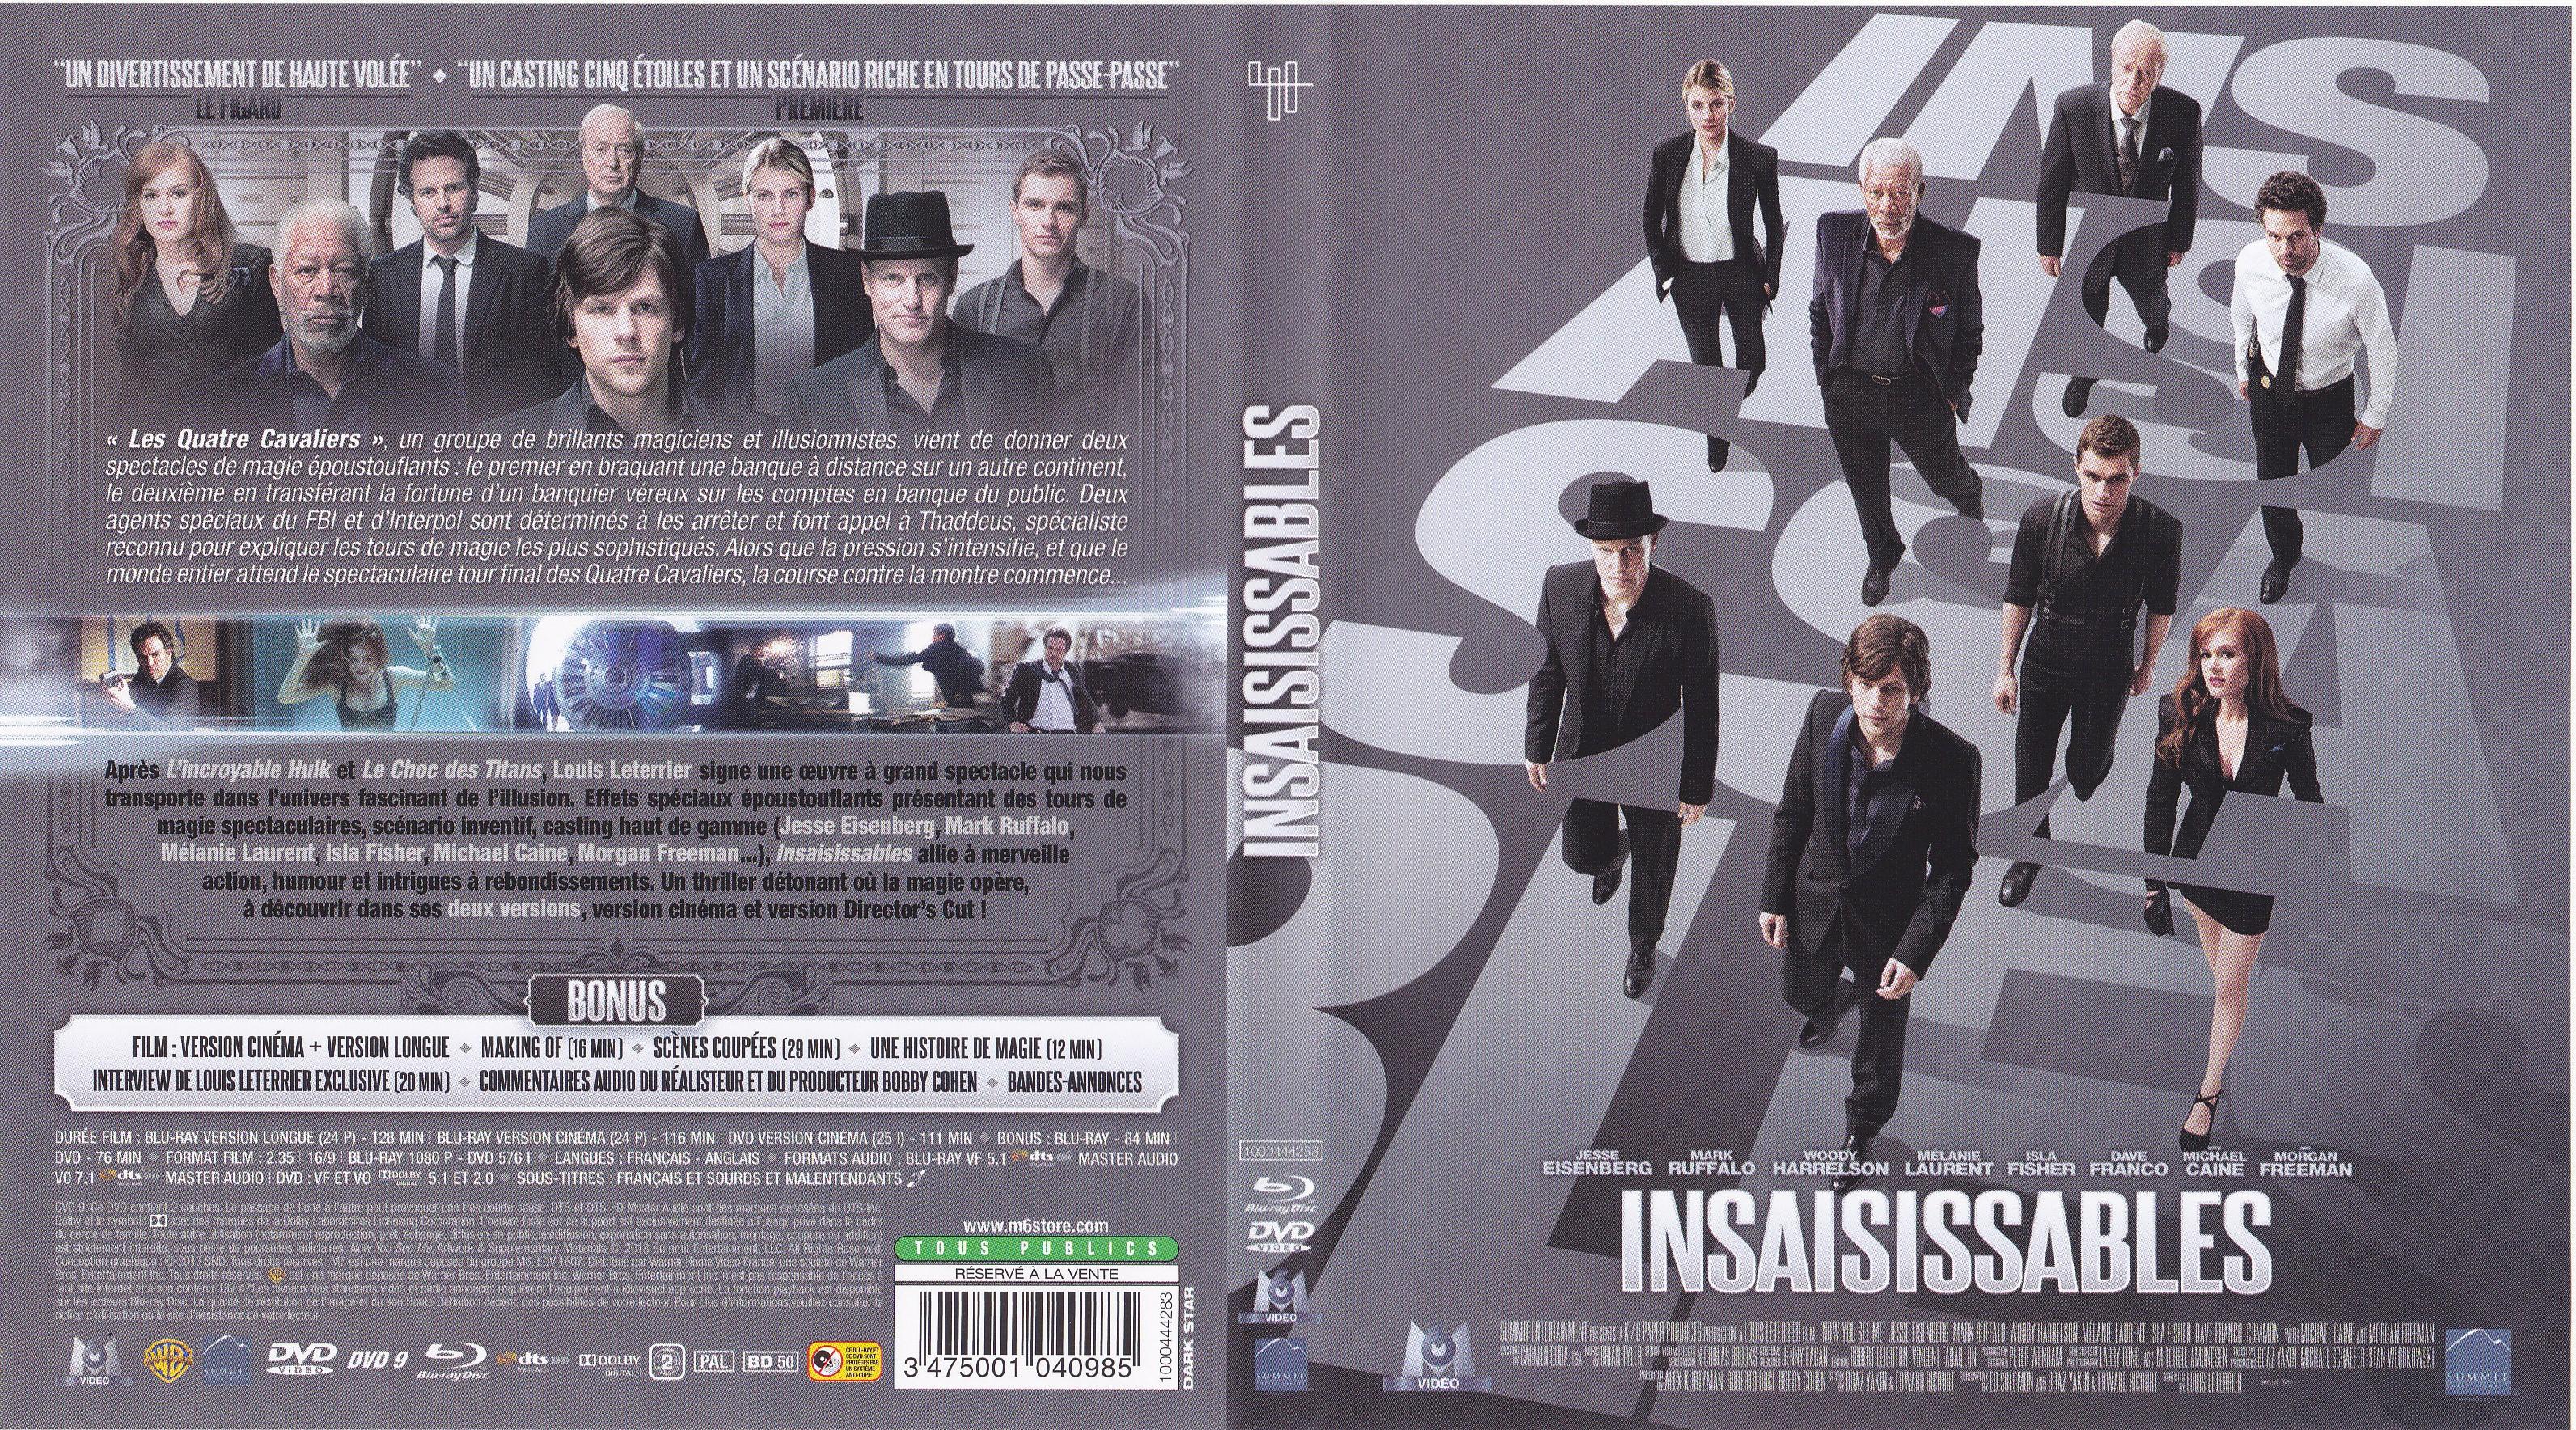 Jaquette DVD Insaisissables (BLU-RAY)